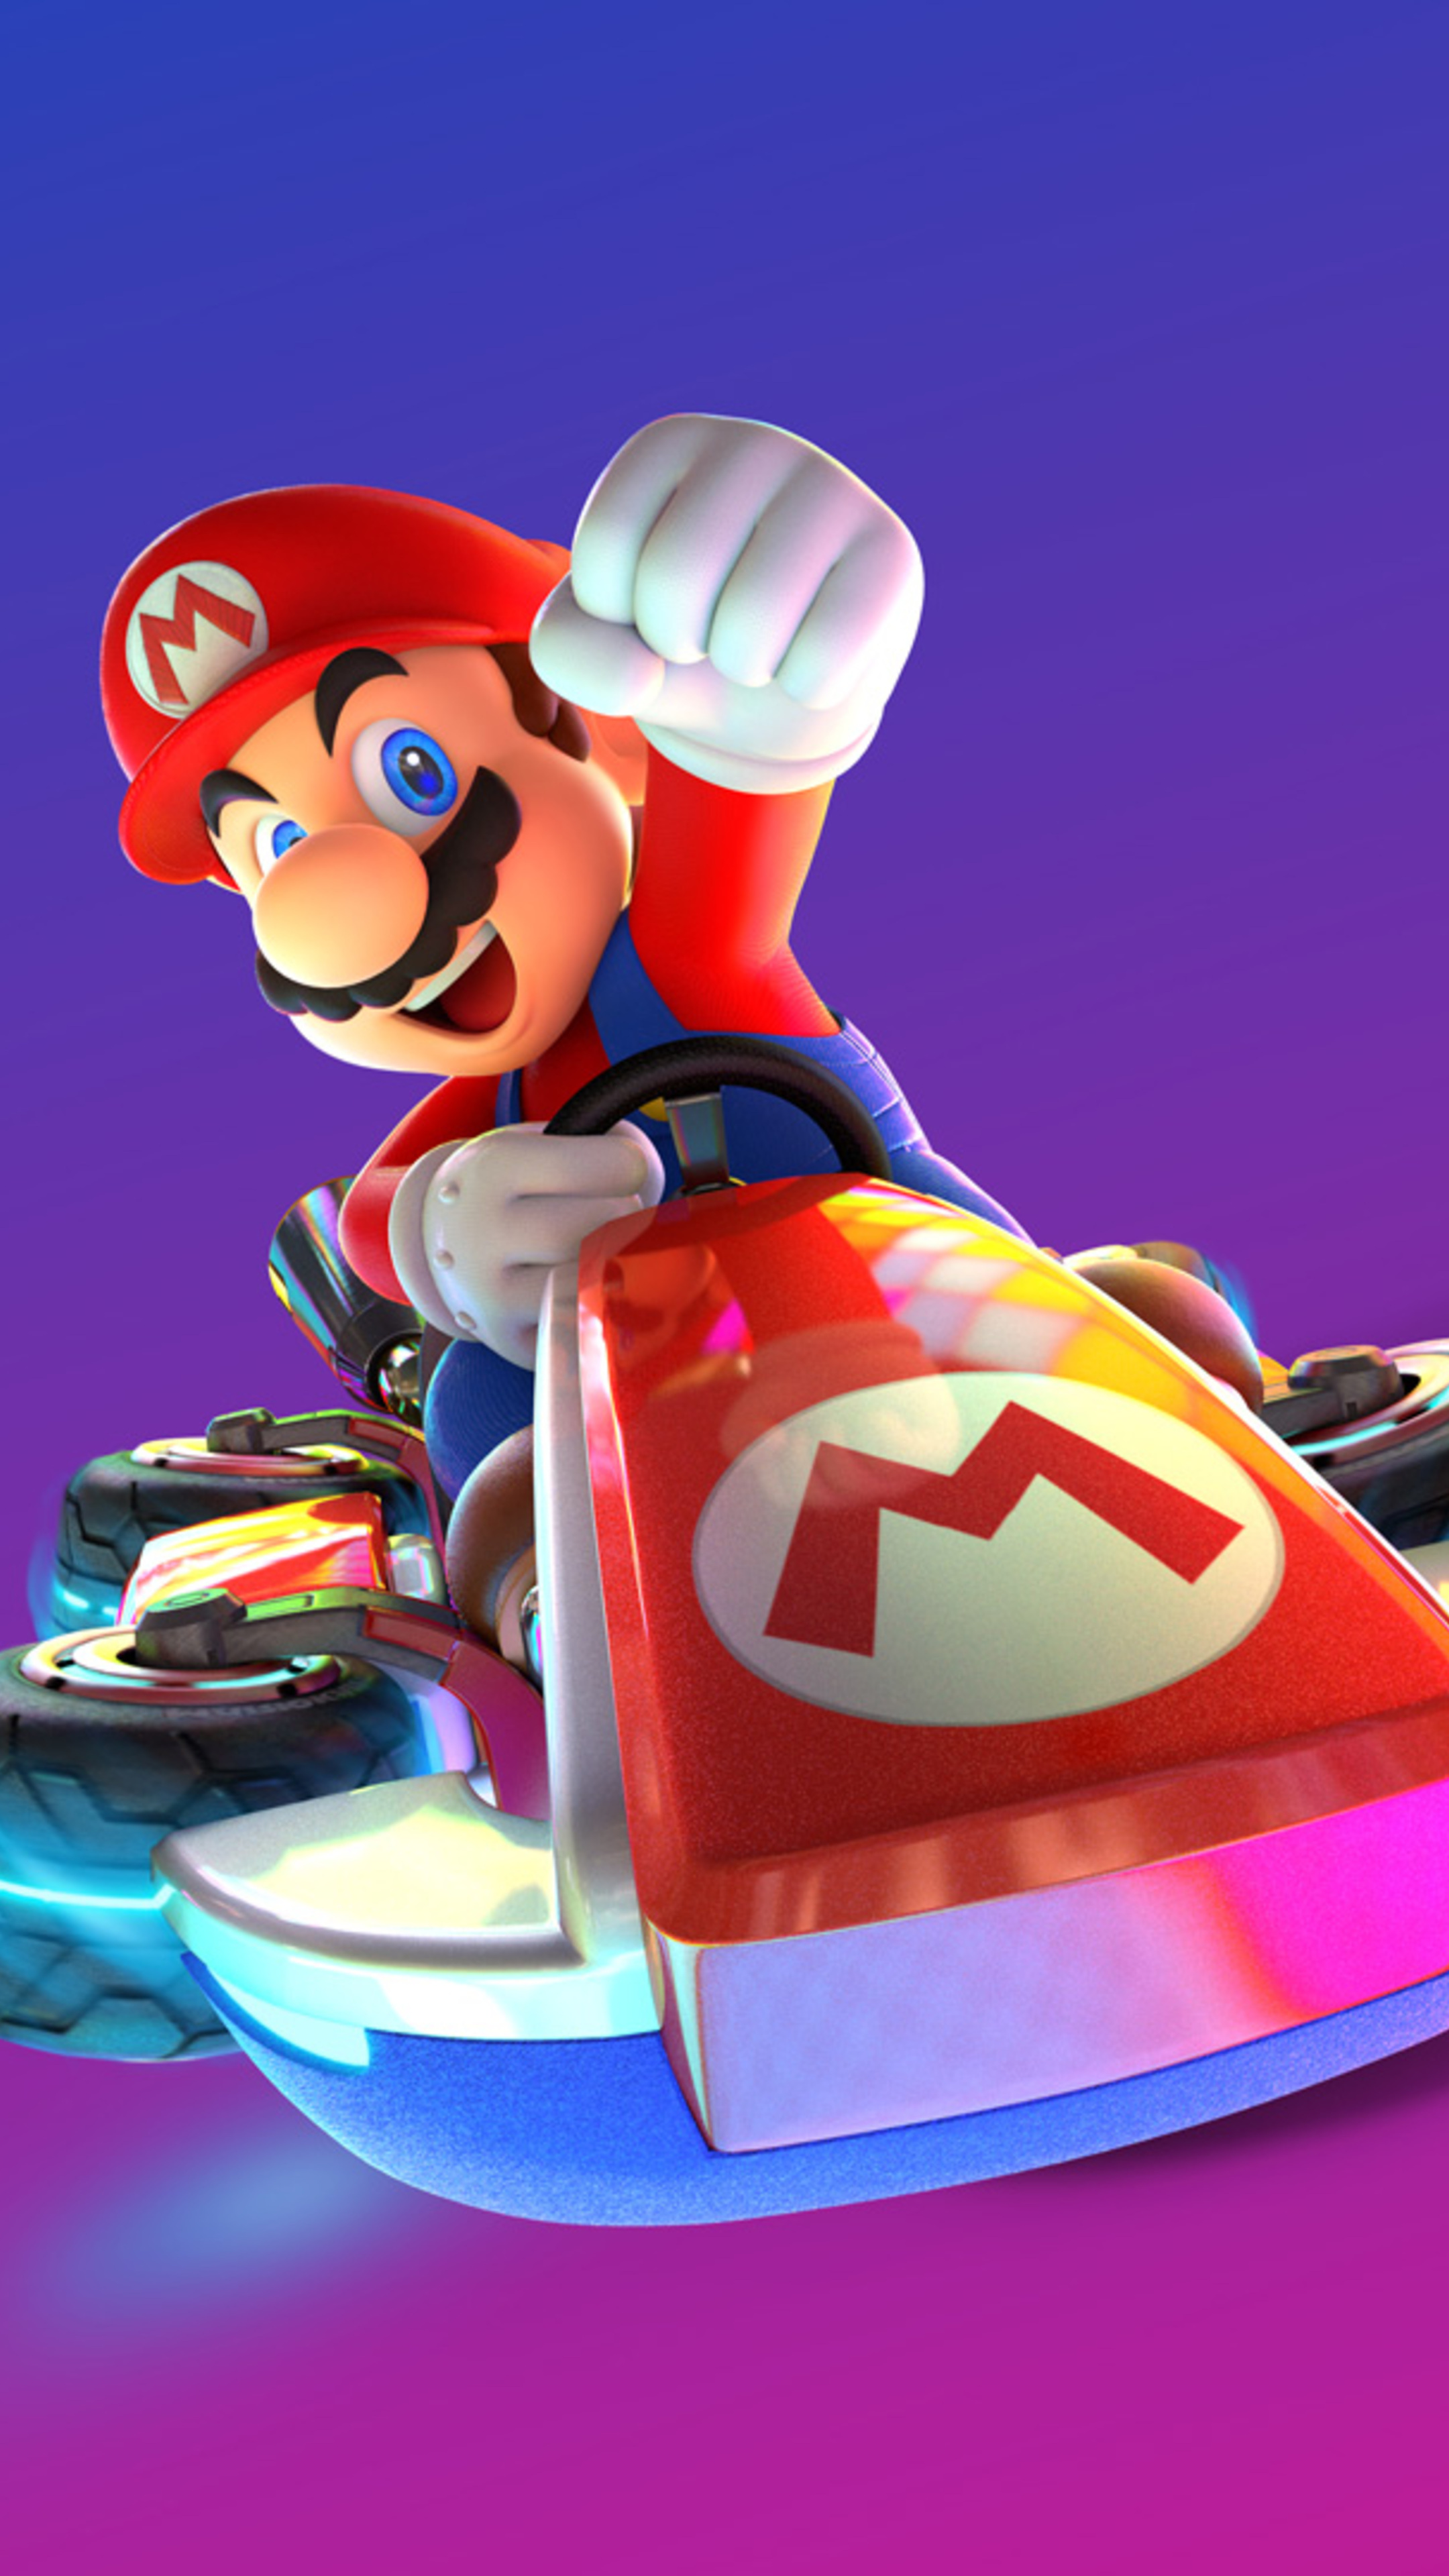 Mario Kart, Deluxe edition game, Xperia wallpapers, Gaming excitement, 2160x3840 4K Handy